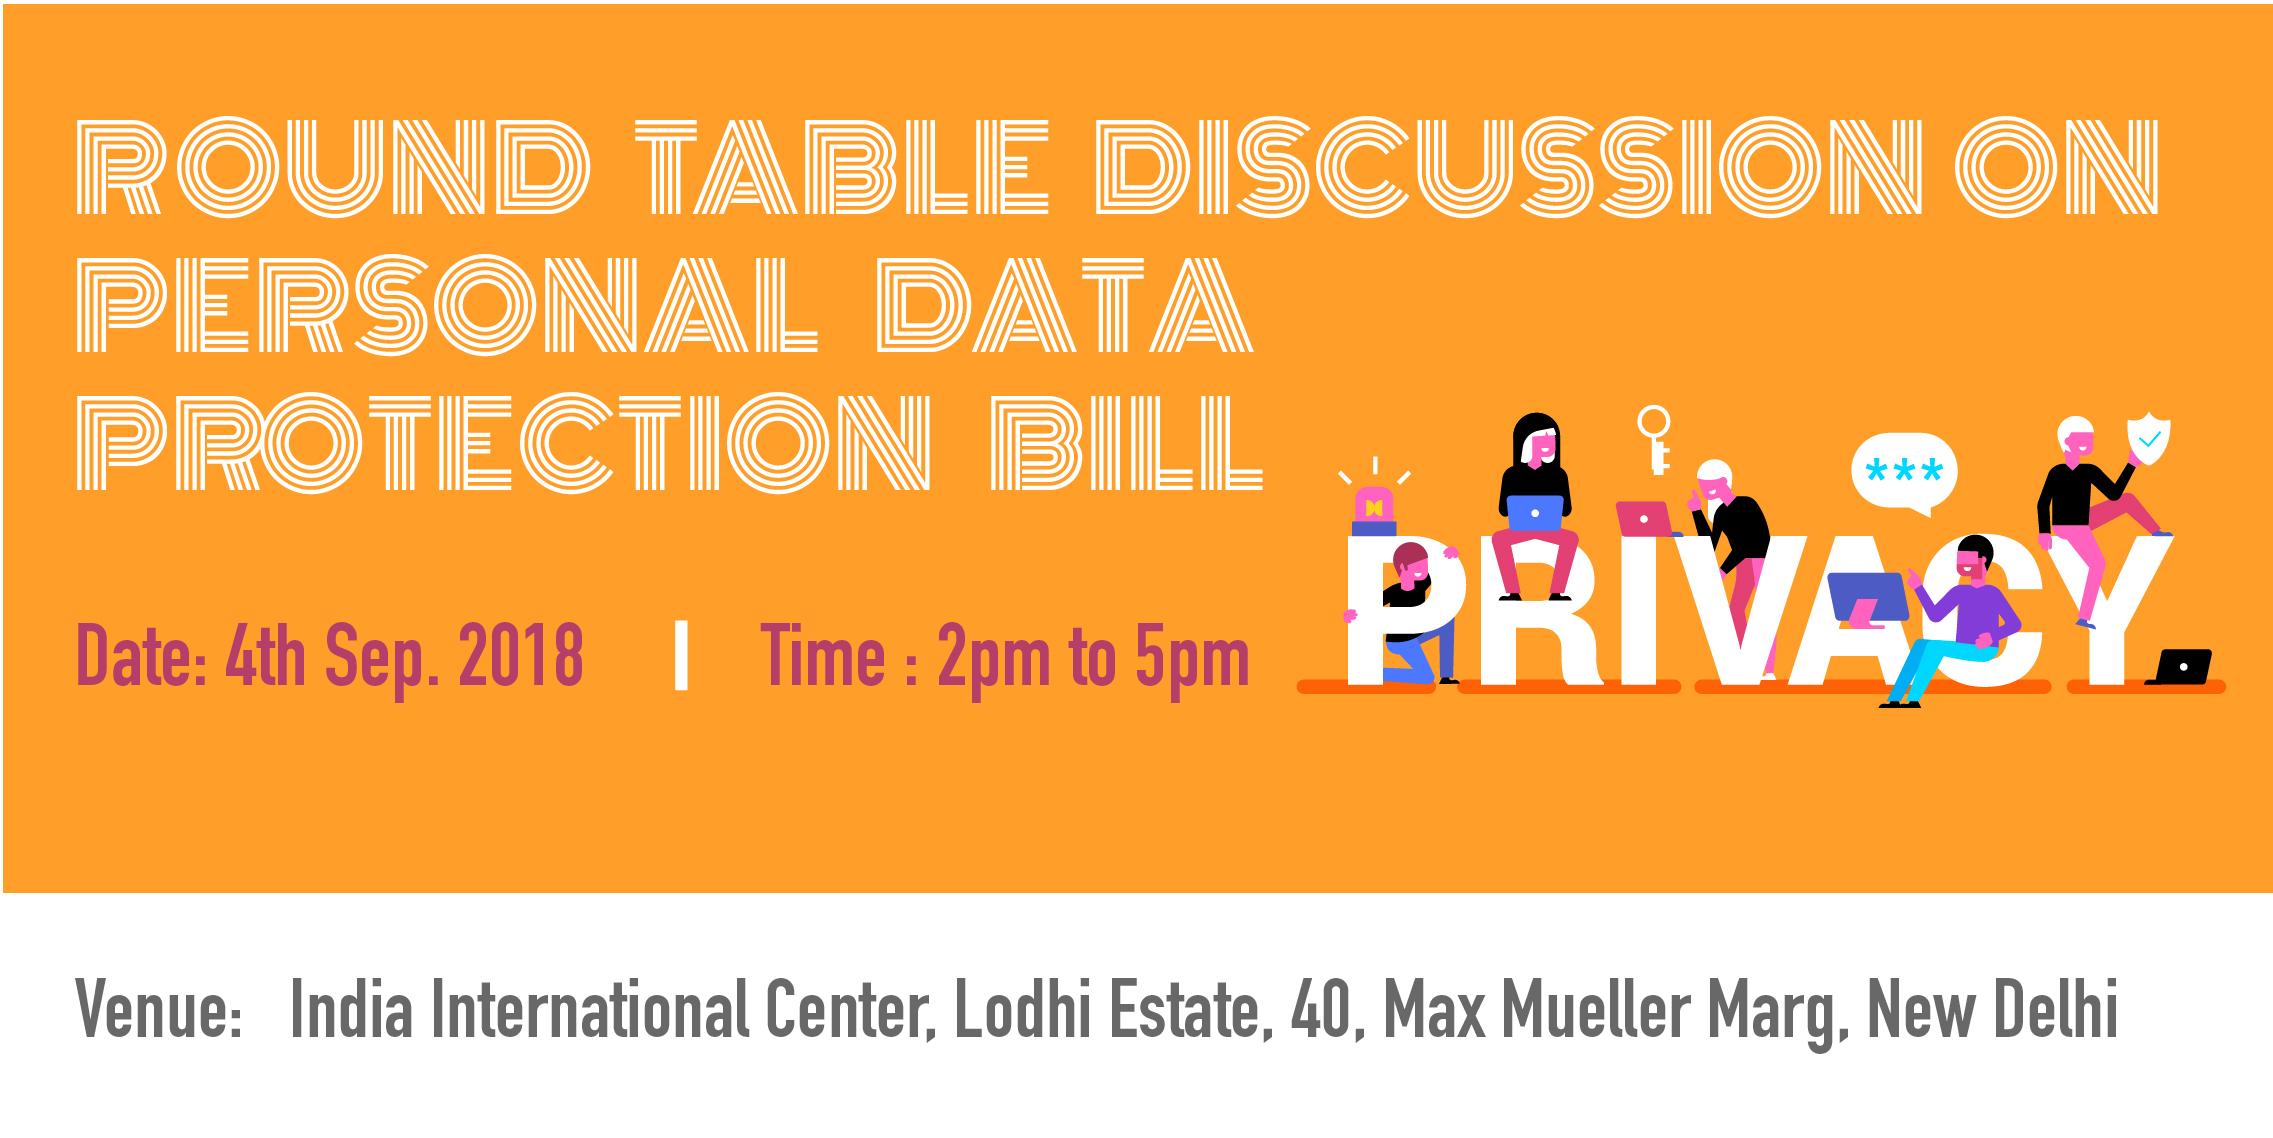 Round Table Discussion on the Personal Data Protection Bill: 4th September (Tuesday) at the IIC, Delhi